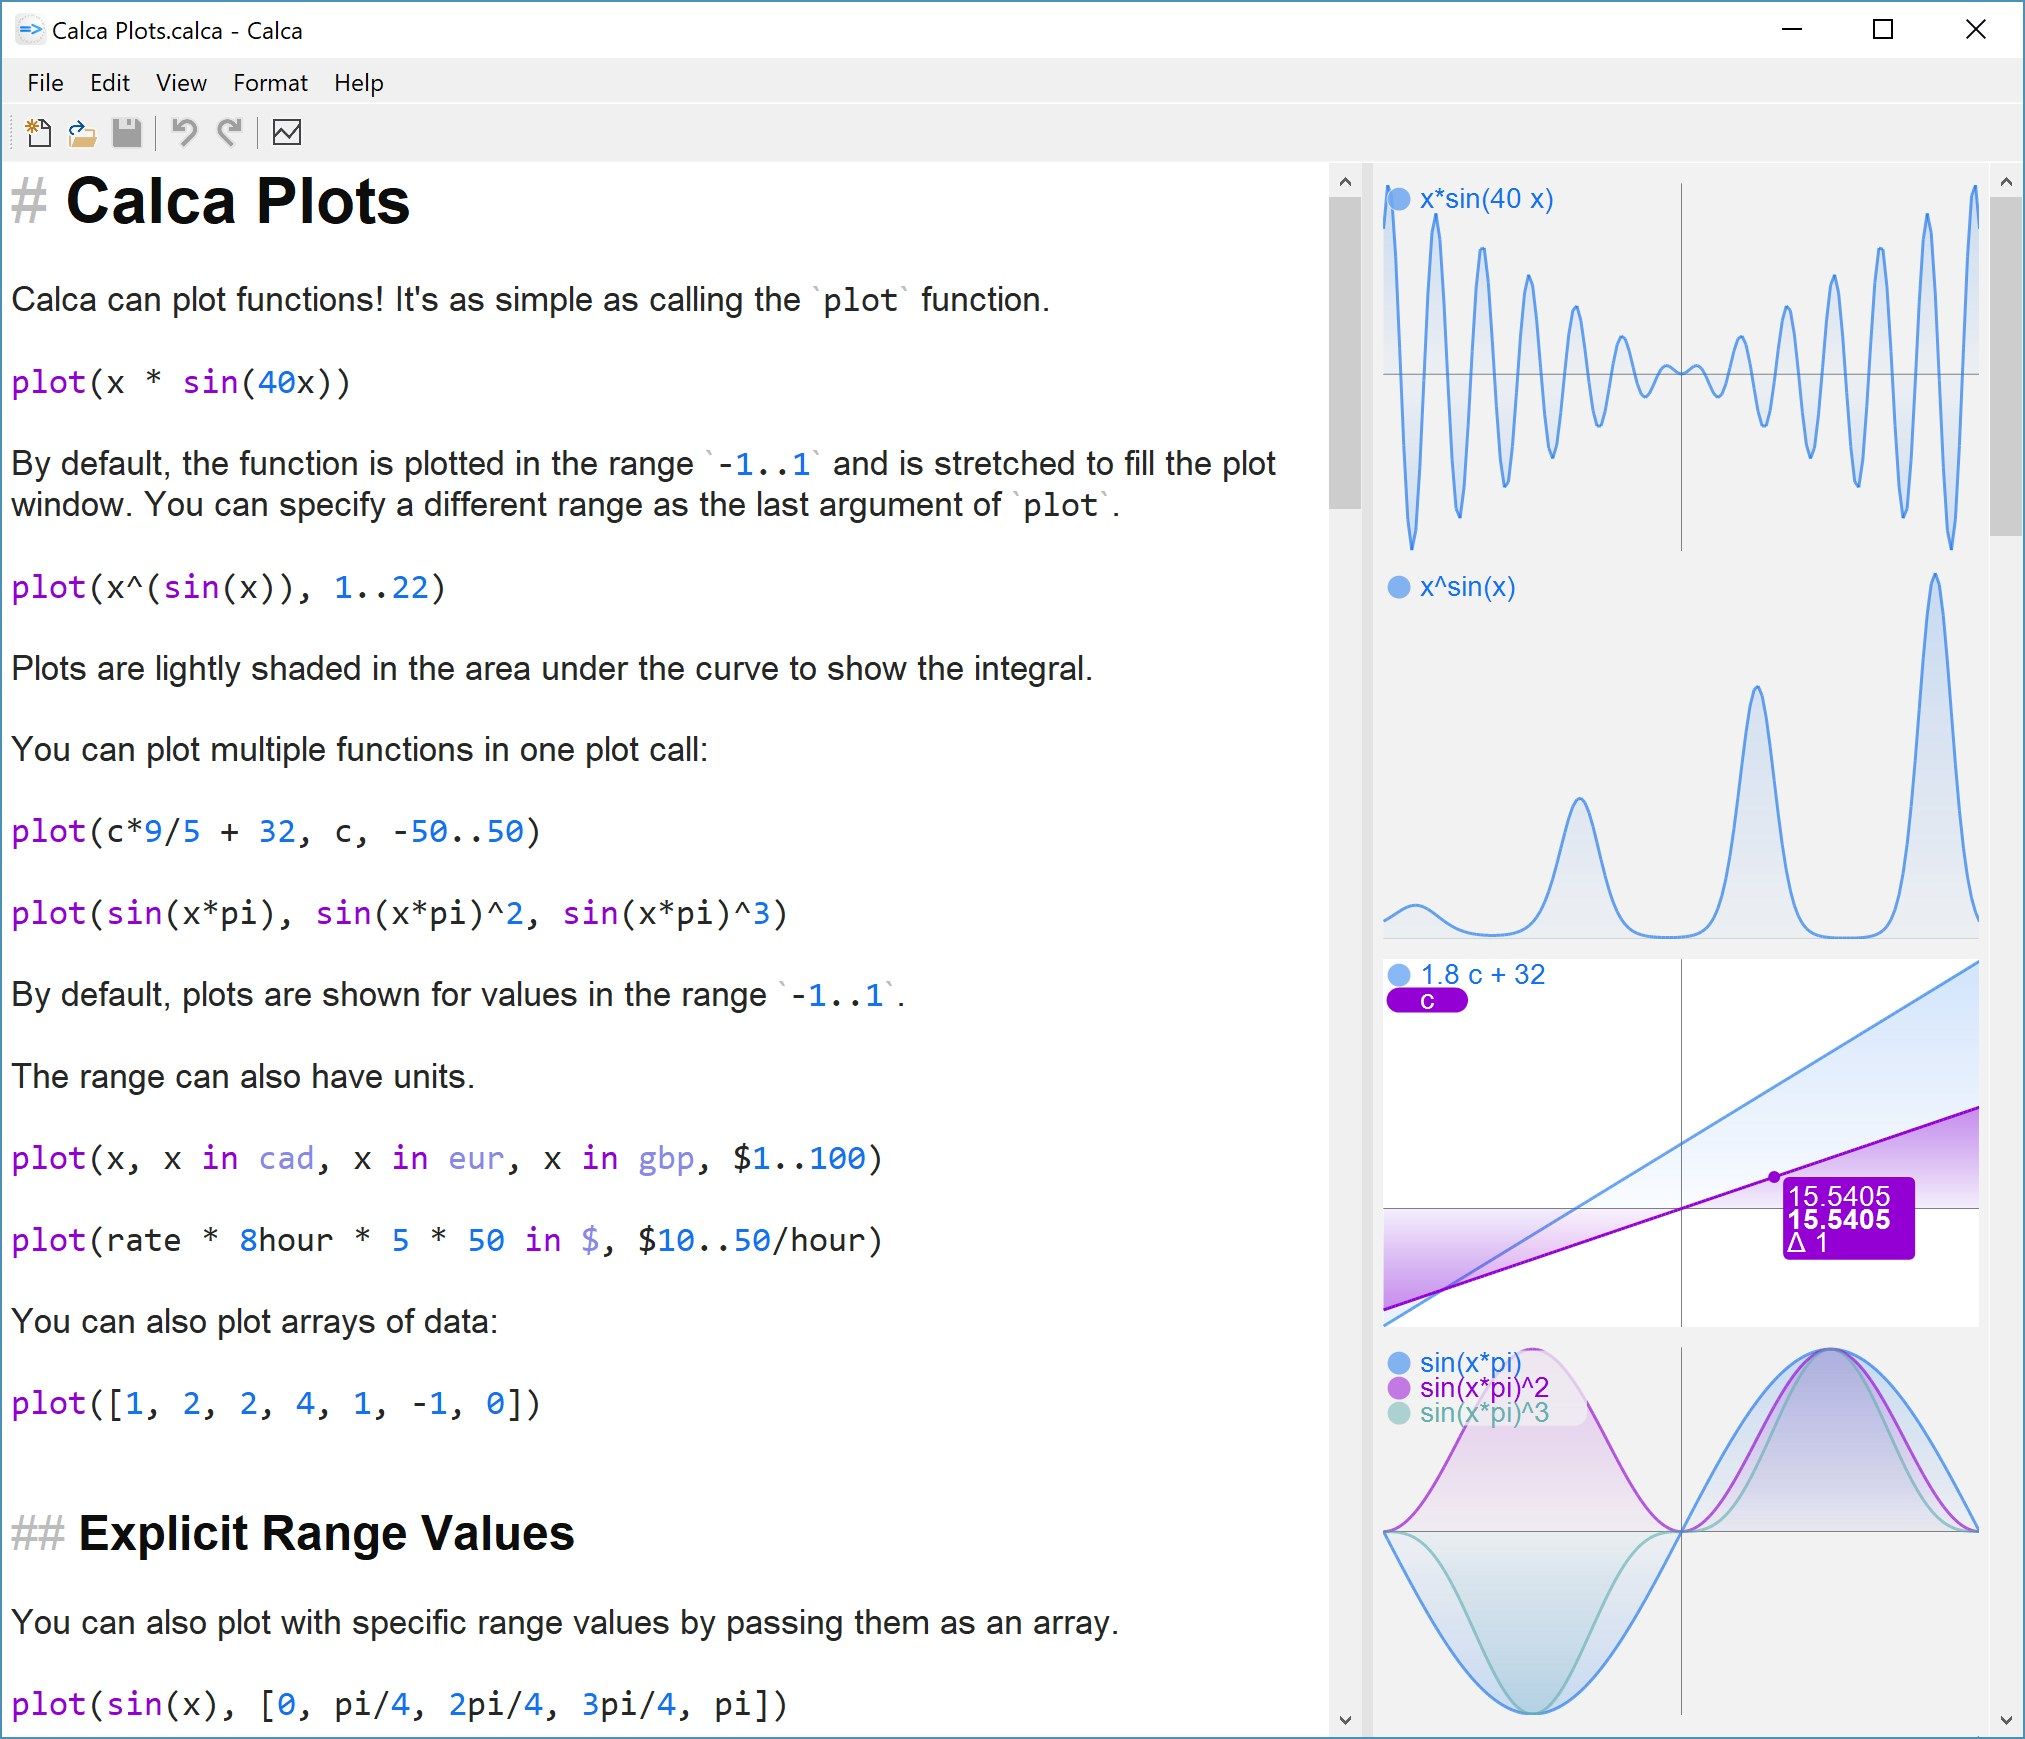 Calca is able to plot functions and data